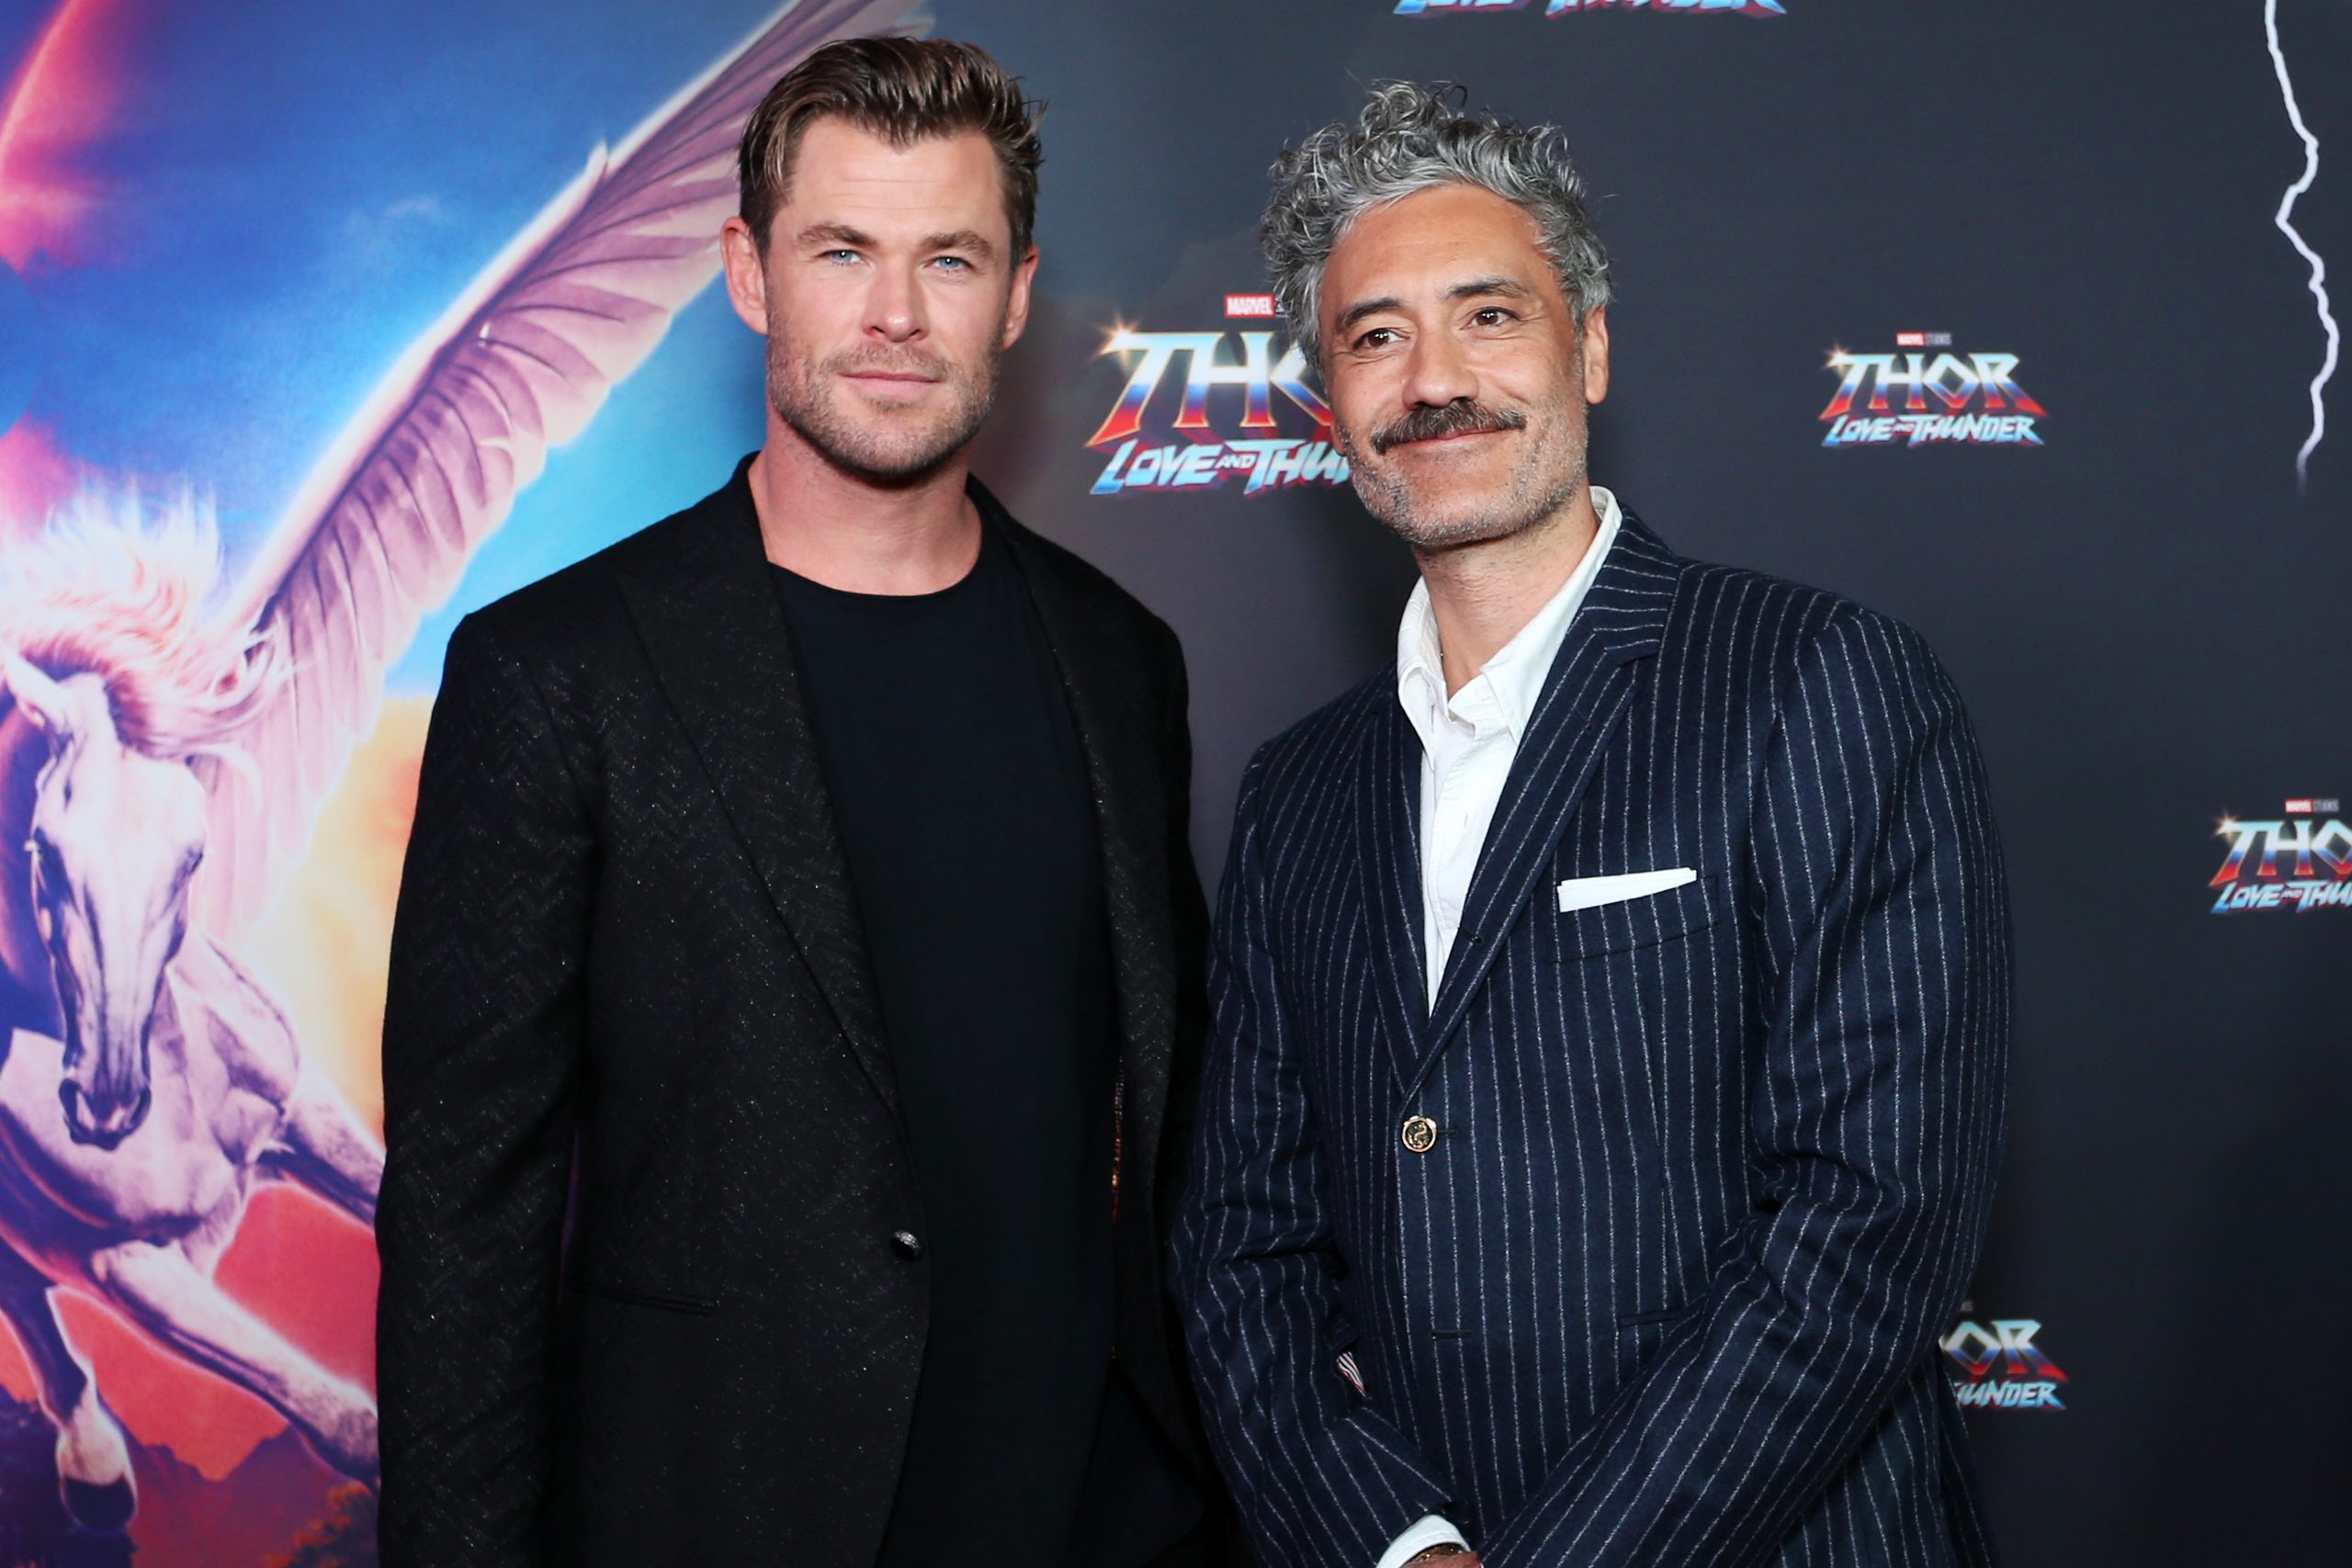 Chris Hemsworth and Taika Waititi, who star in Marvel's 'Thor: Love and Thunder,' pose for pictures on the red carpet.